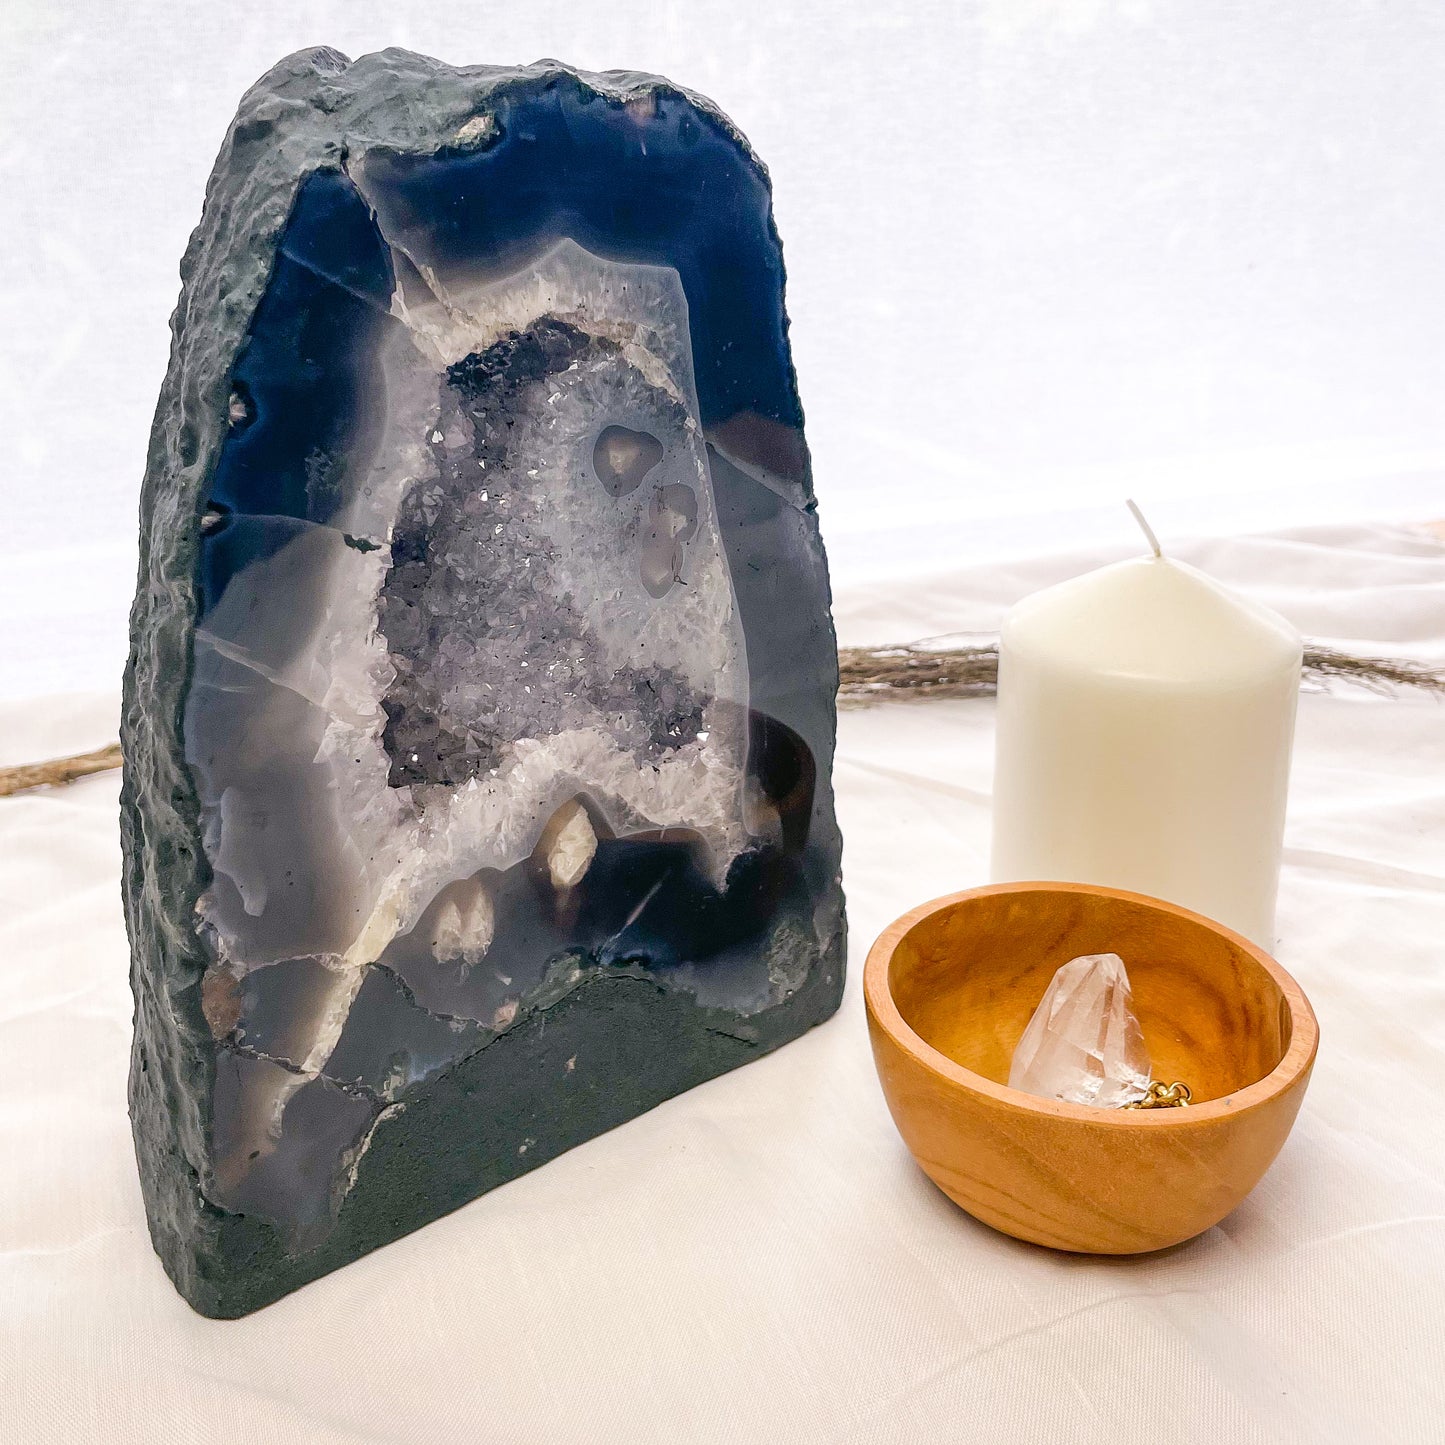 Blue lace agate, flower amethyst stalactite + Clear quartz crystal geode cave cathedral